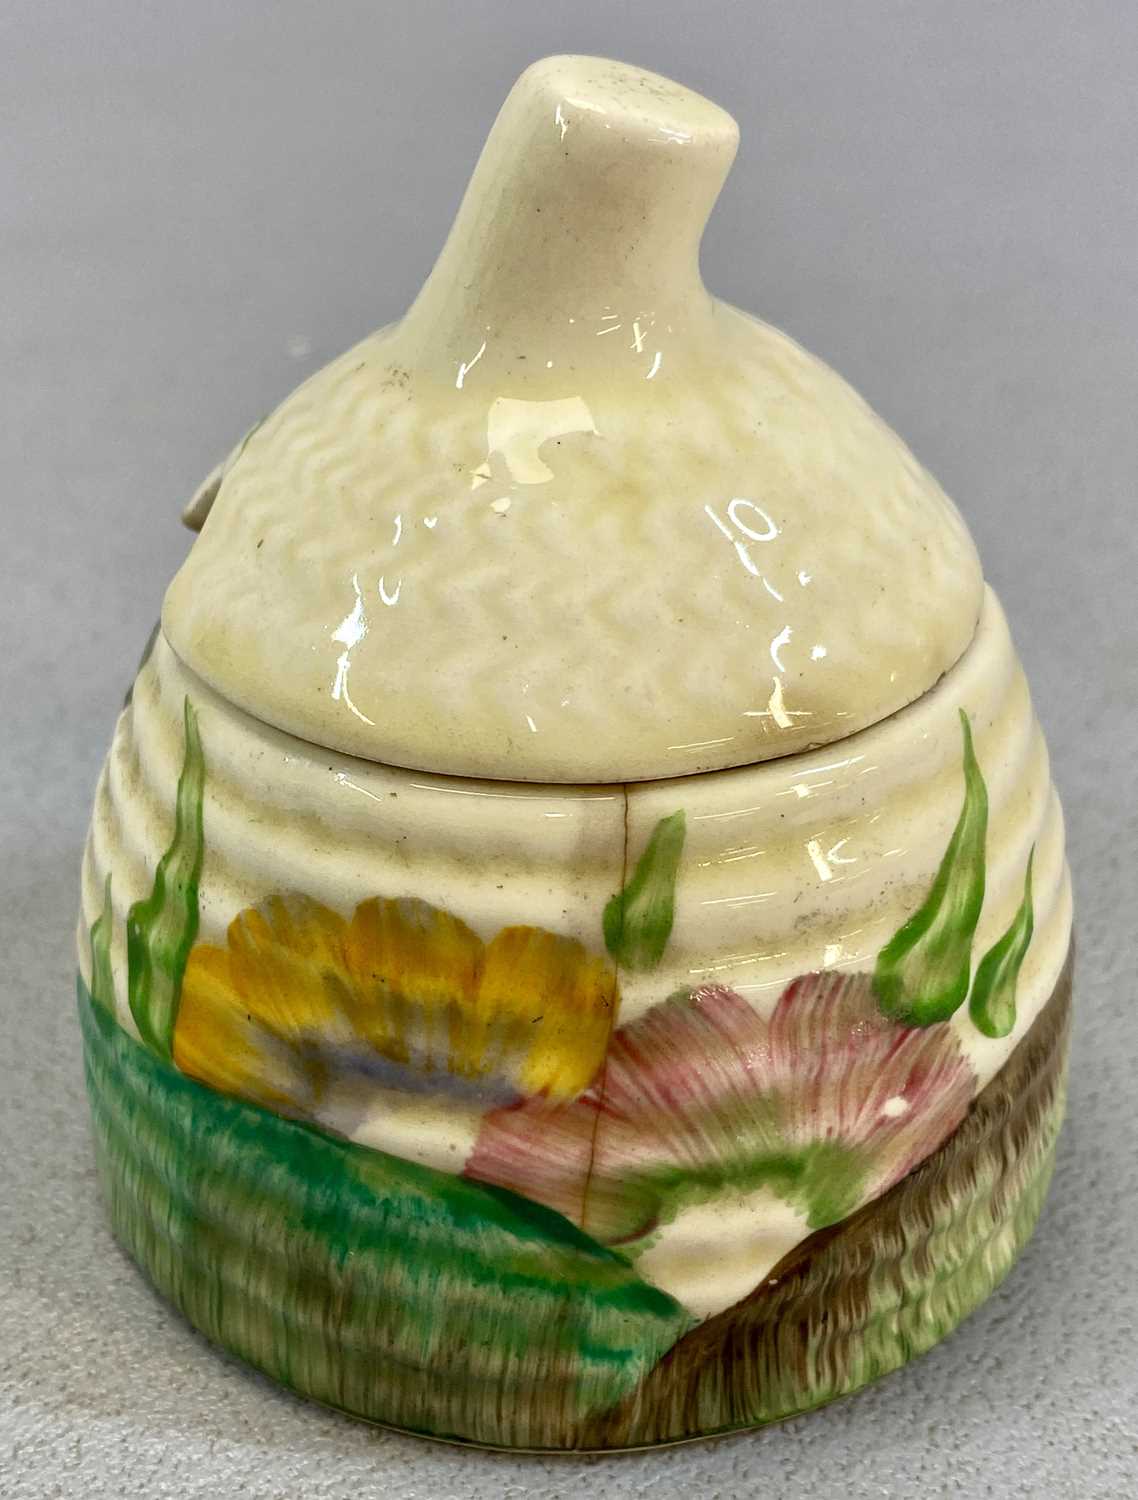 CLARICE CLIFF NEWPORT POTTERY VISCARIA PATTERN HONEY POT & COVER, black printed marks, 8cms (h) - Image 3 of 3